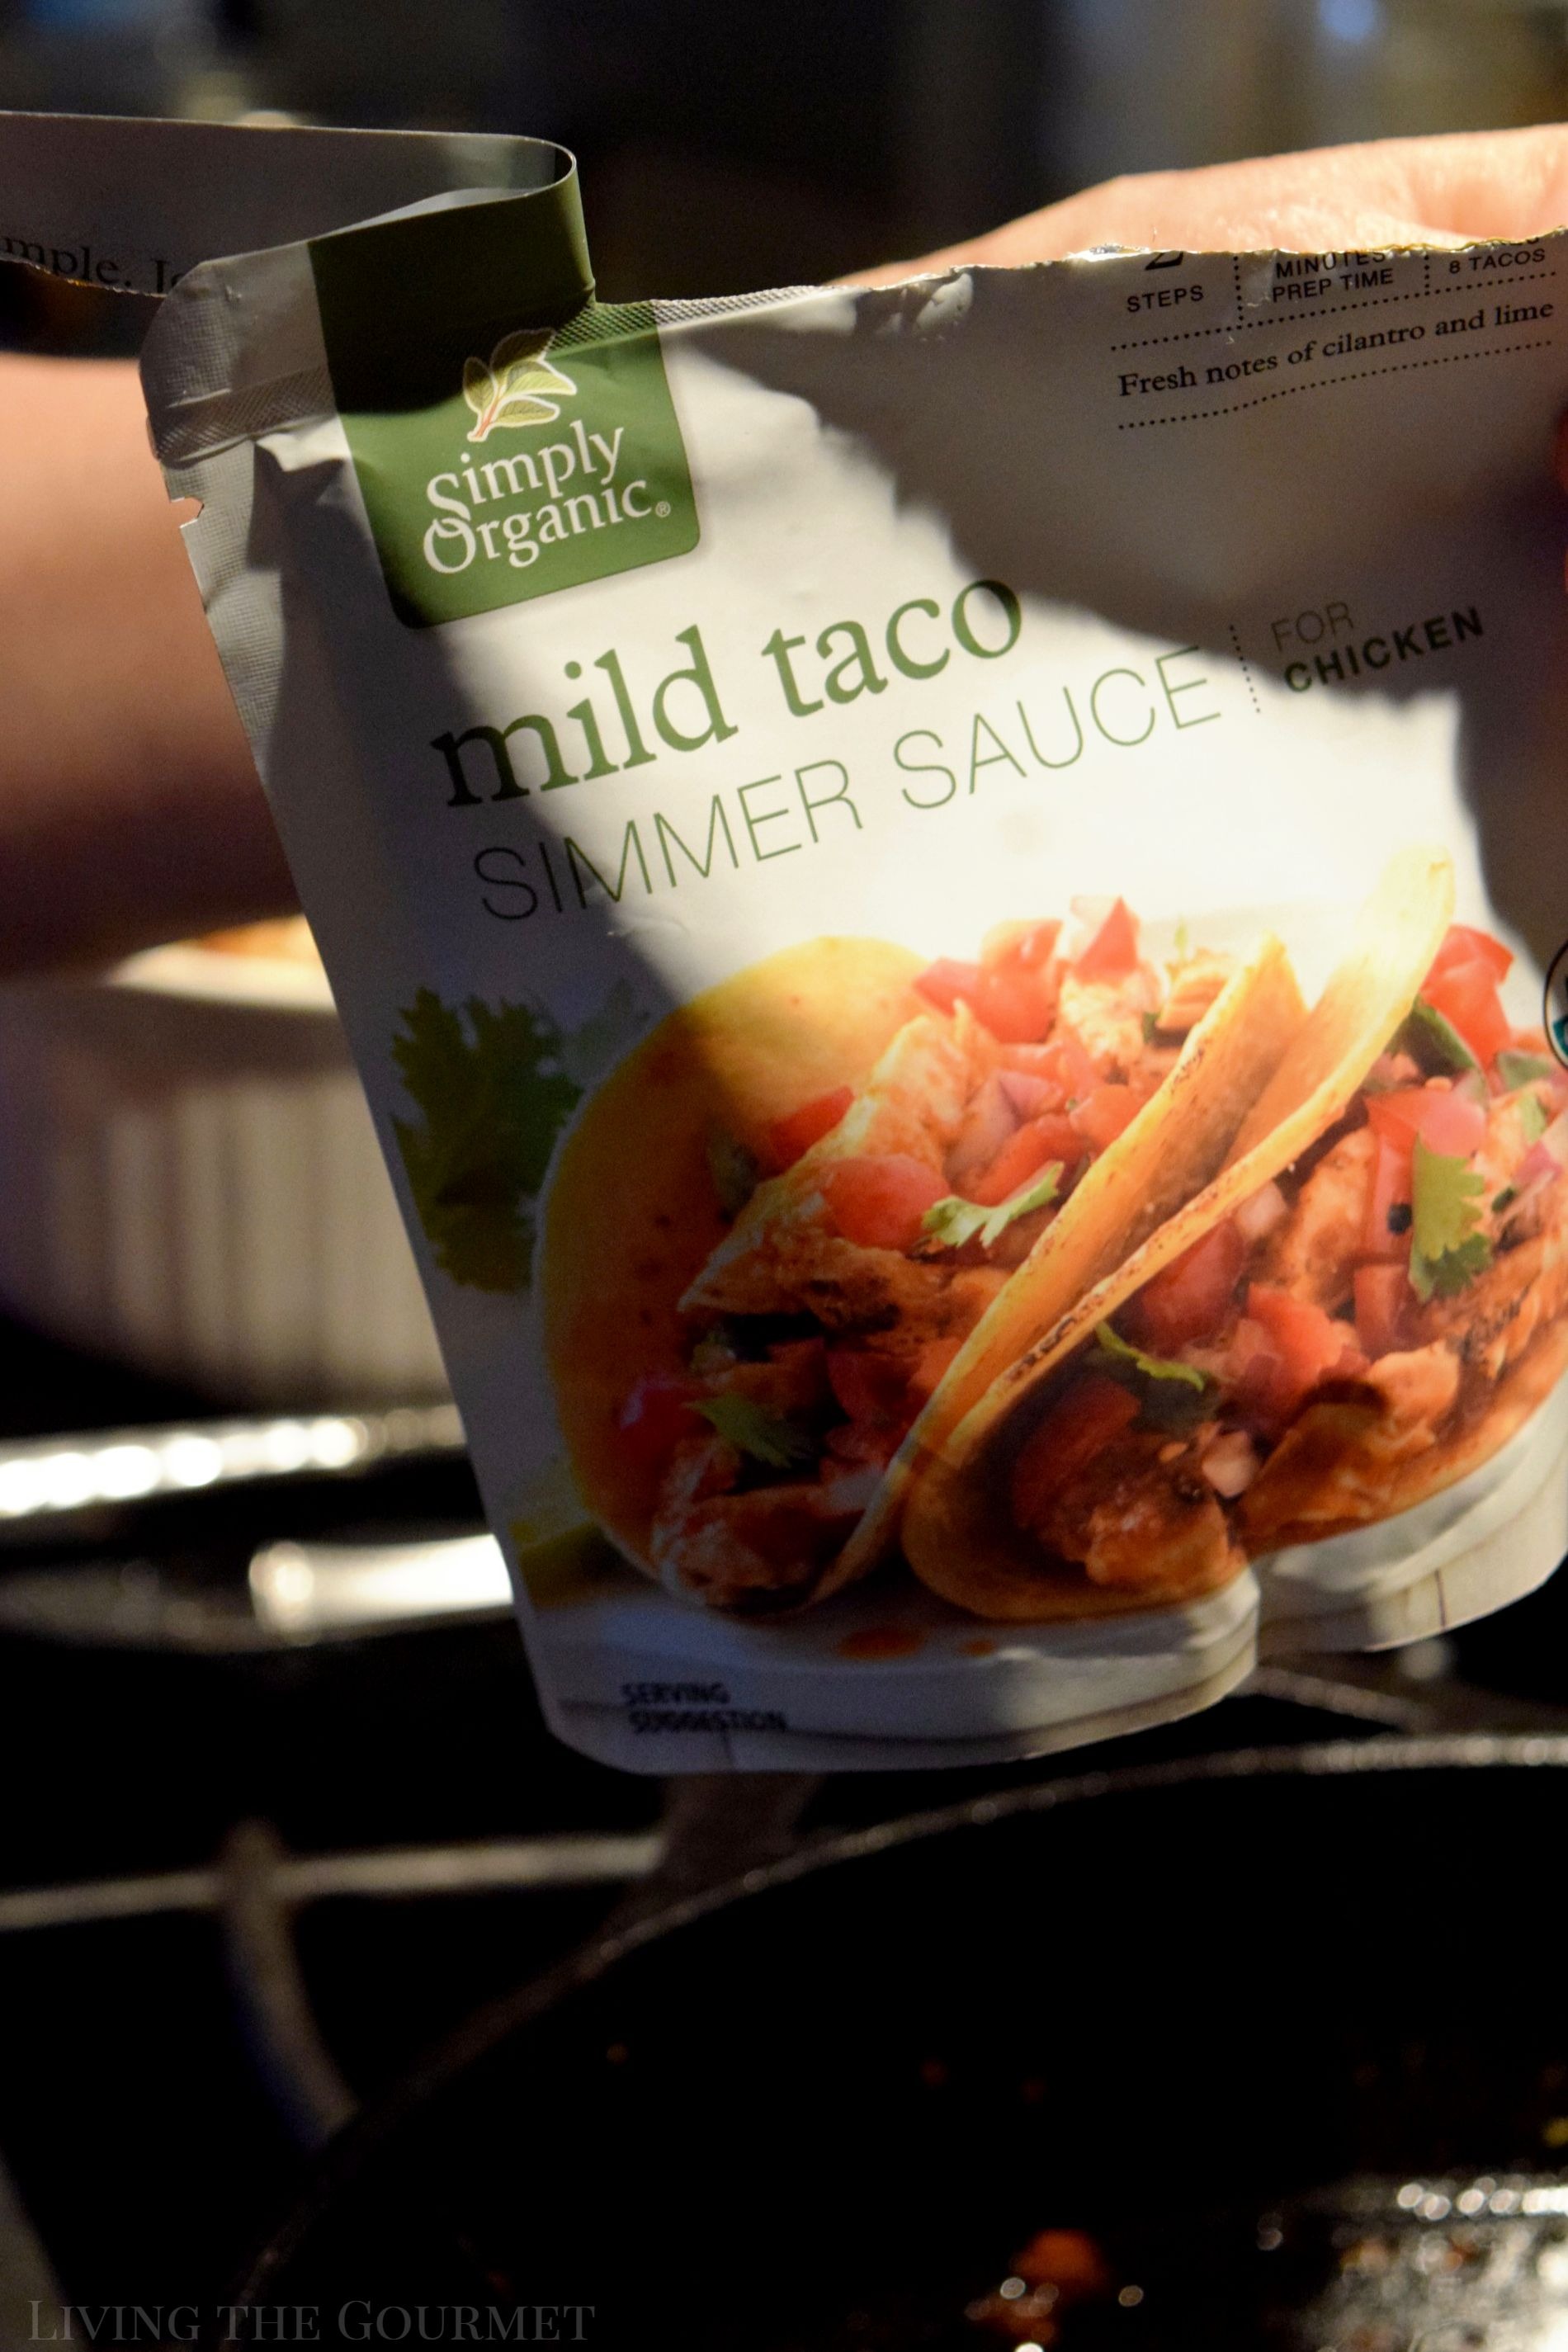 Living the Gourmet: Give your typical tacos a refresh with warm flatbreads, a fresh tomato salad and Smiply Organic Mild Taco Simmer Sauce - a chef-worthy, richly seasoned sauce made with organic ingredients! #ad